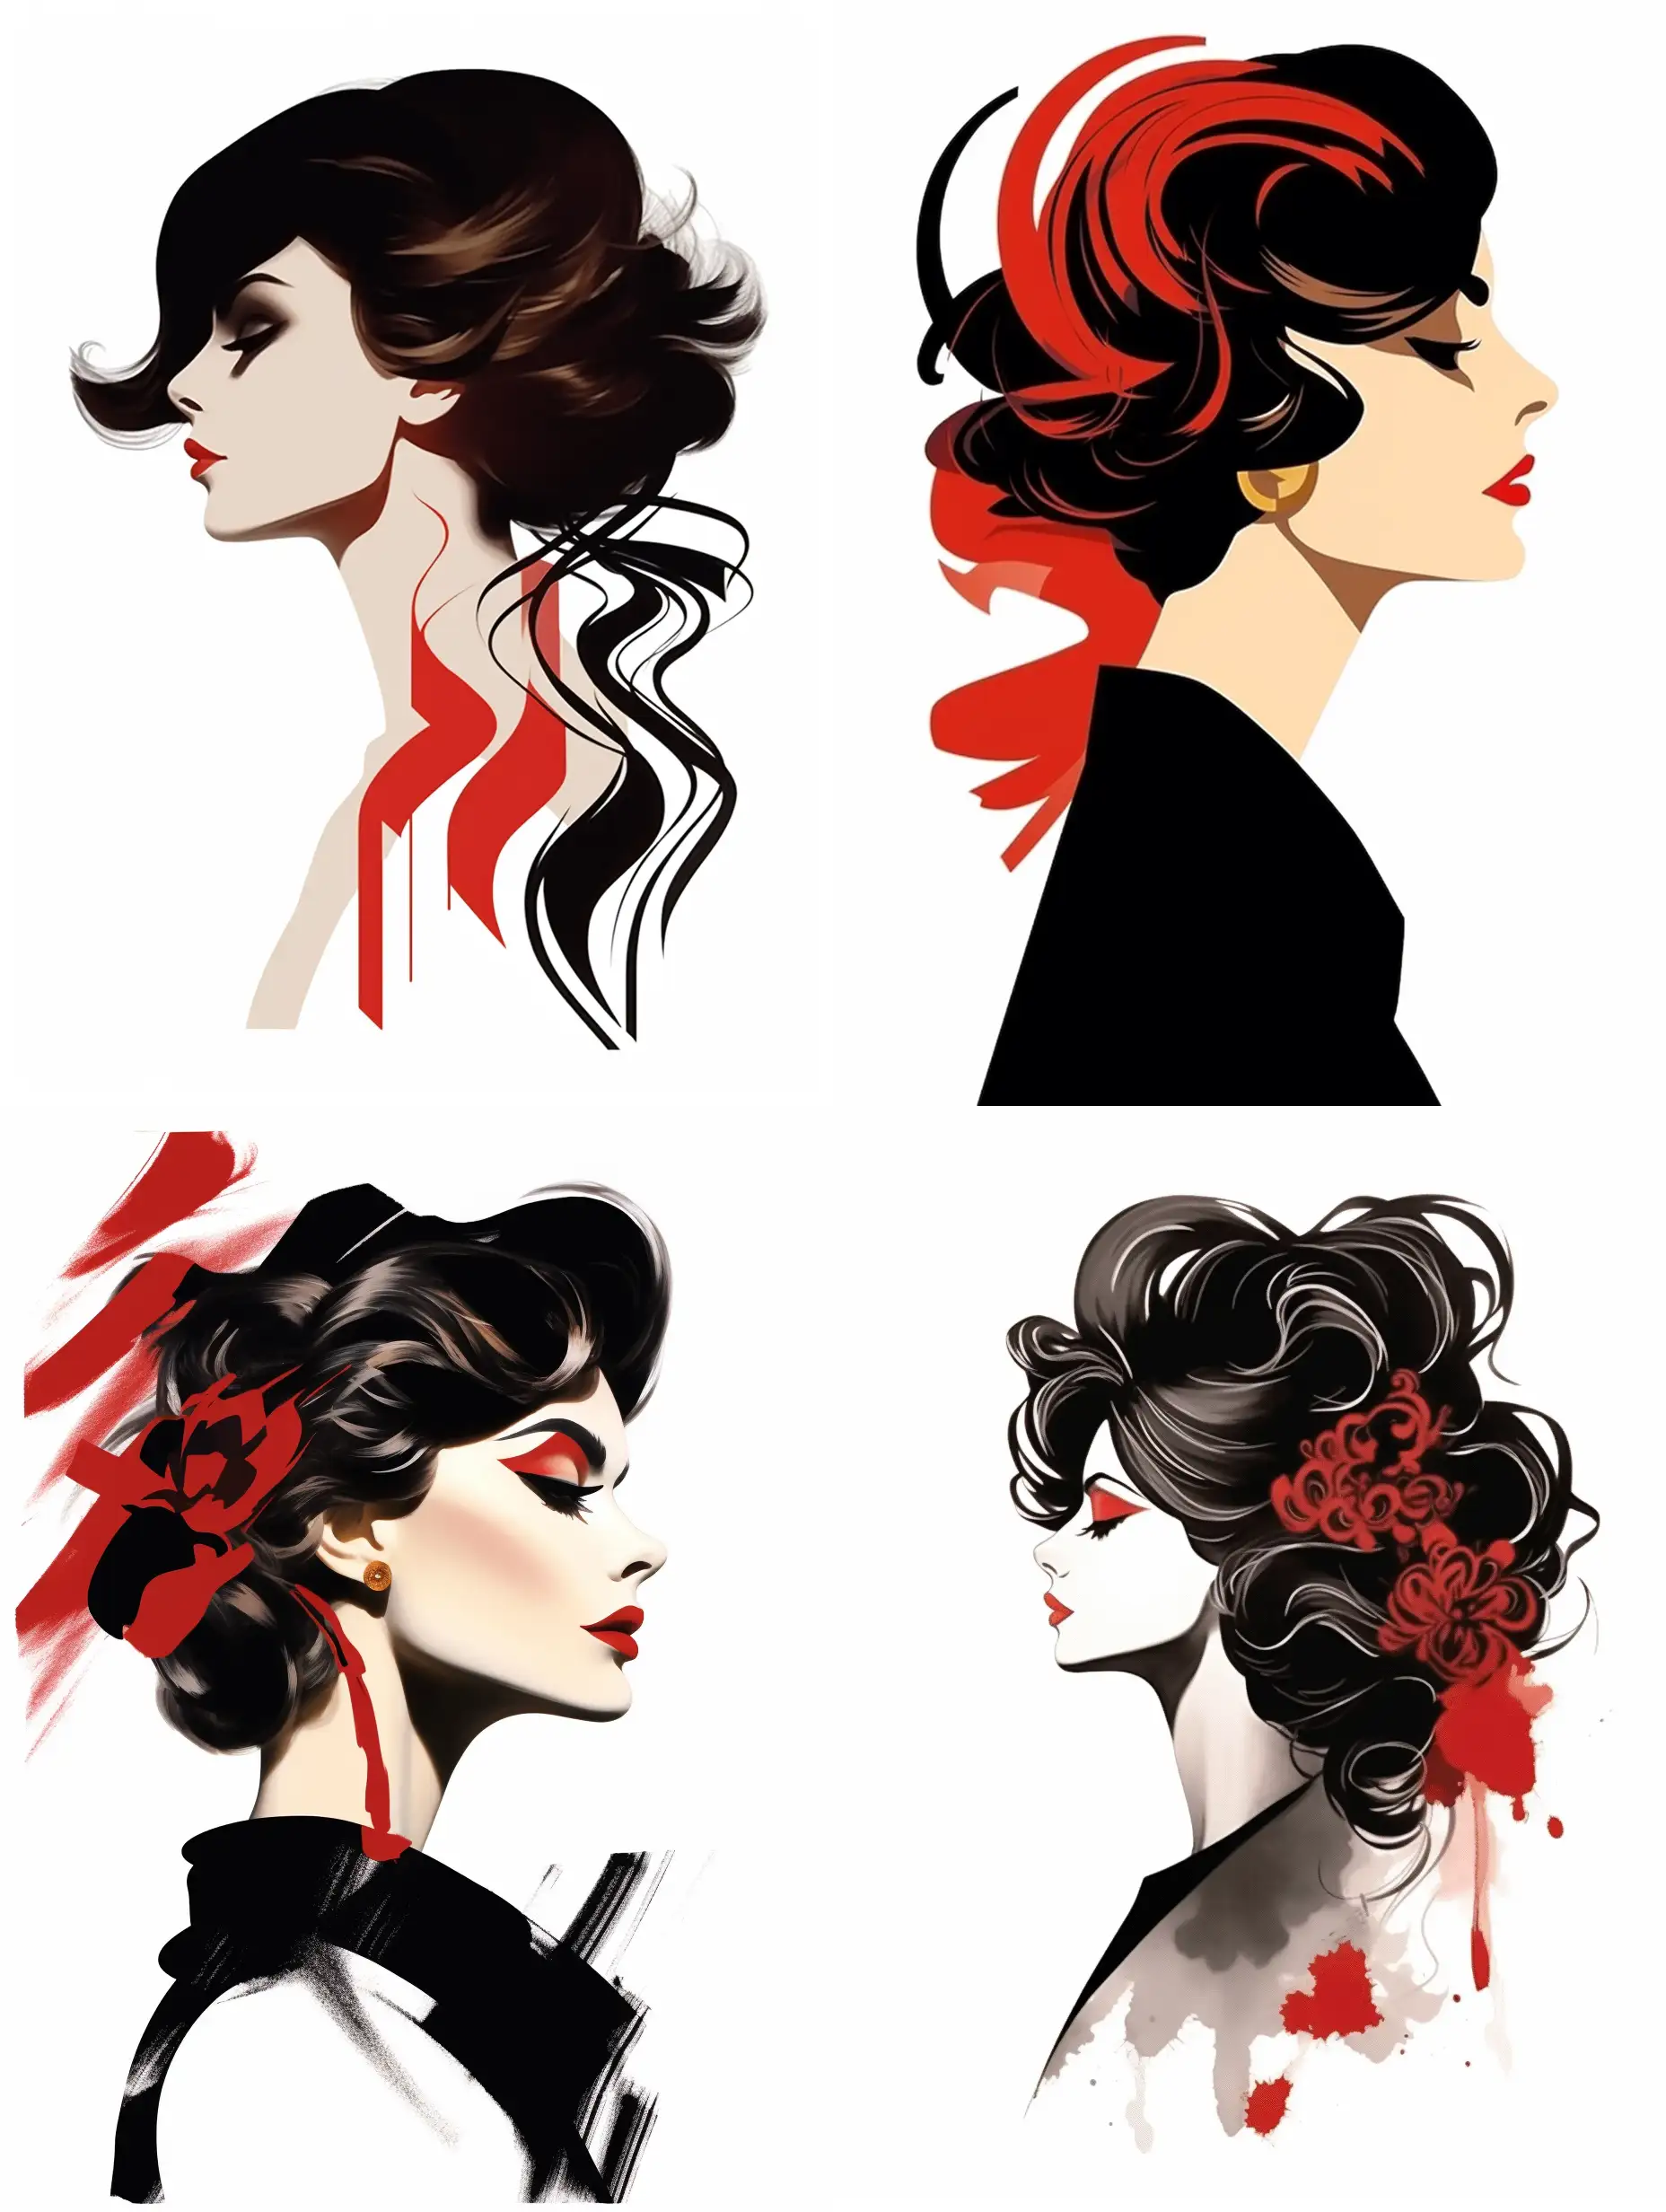 Stylish-Portrait-of-Young-Coco-Chanel-in-Decorative-Caricature-Style